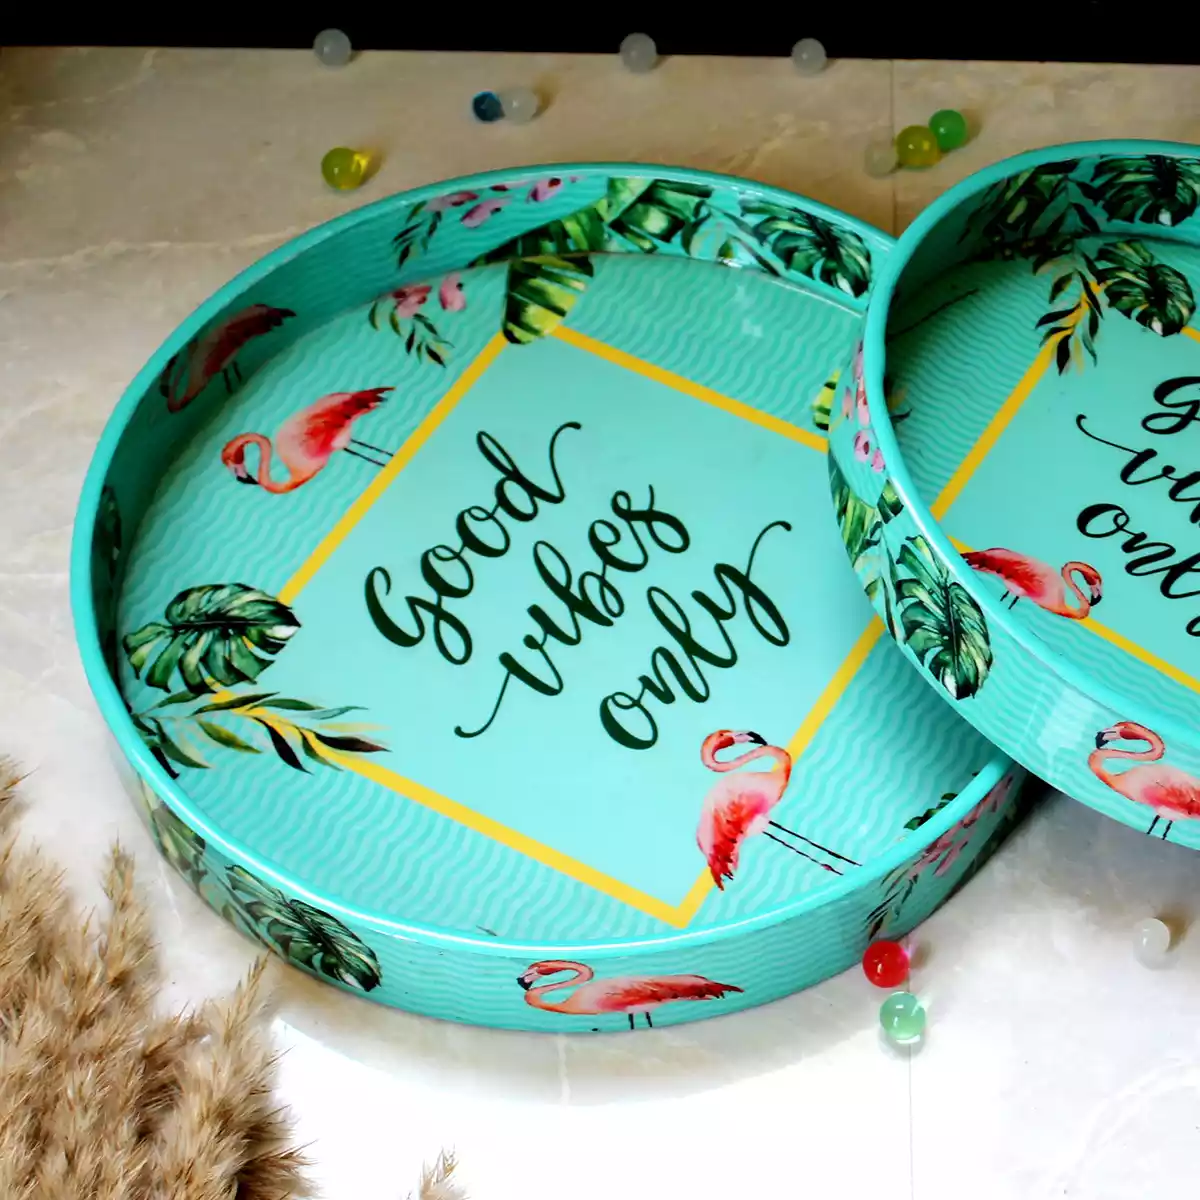 Good Vibes Only - Round Serving Tray, Set of 2